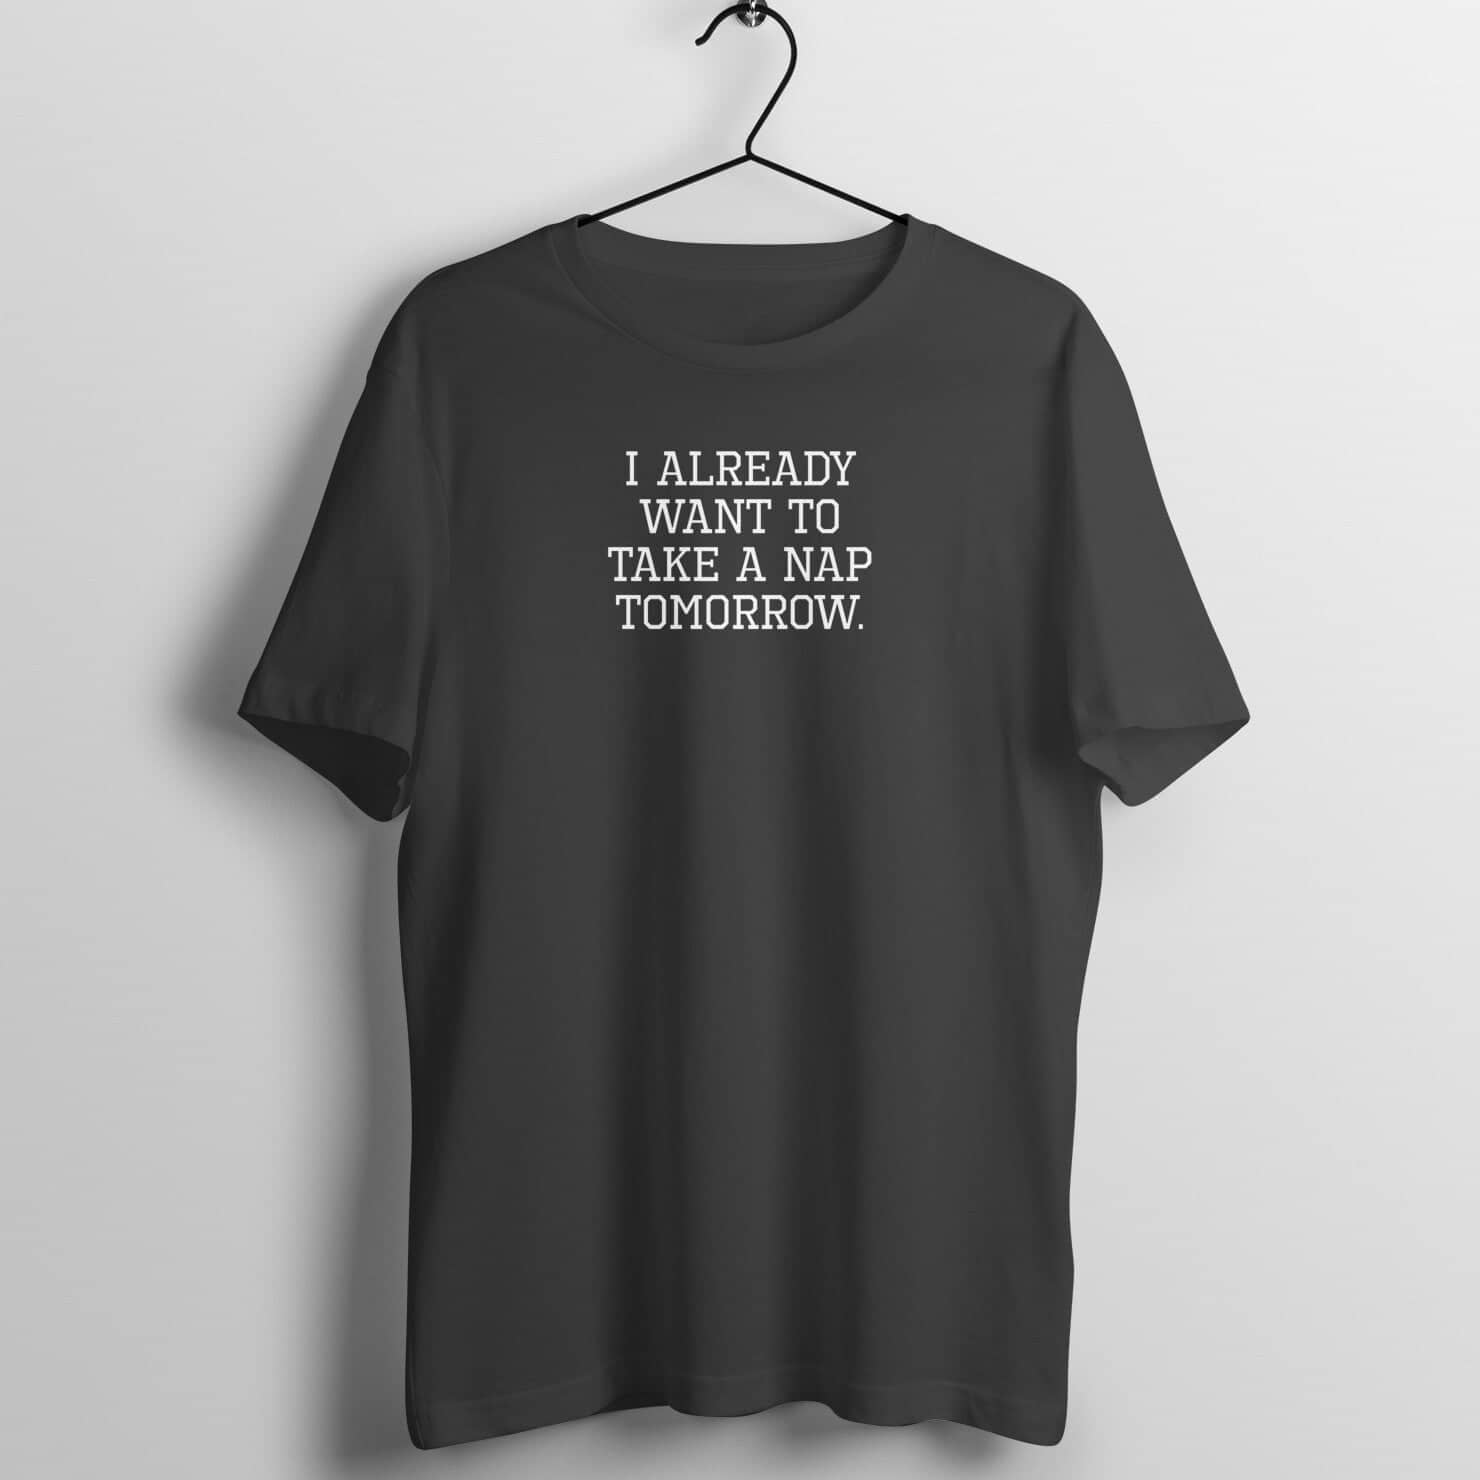 I Already Want to Take A Nap Tomorrow Funny Black T Shirt for Men and Women freeshipping - Catch My Drift India